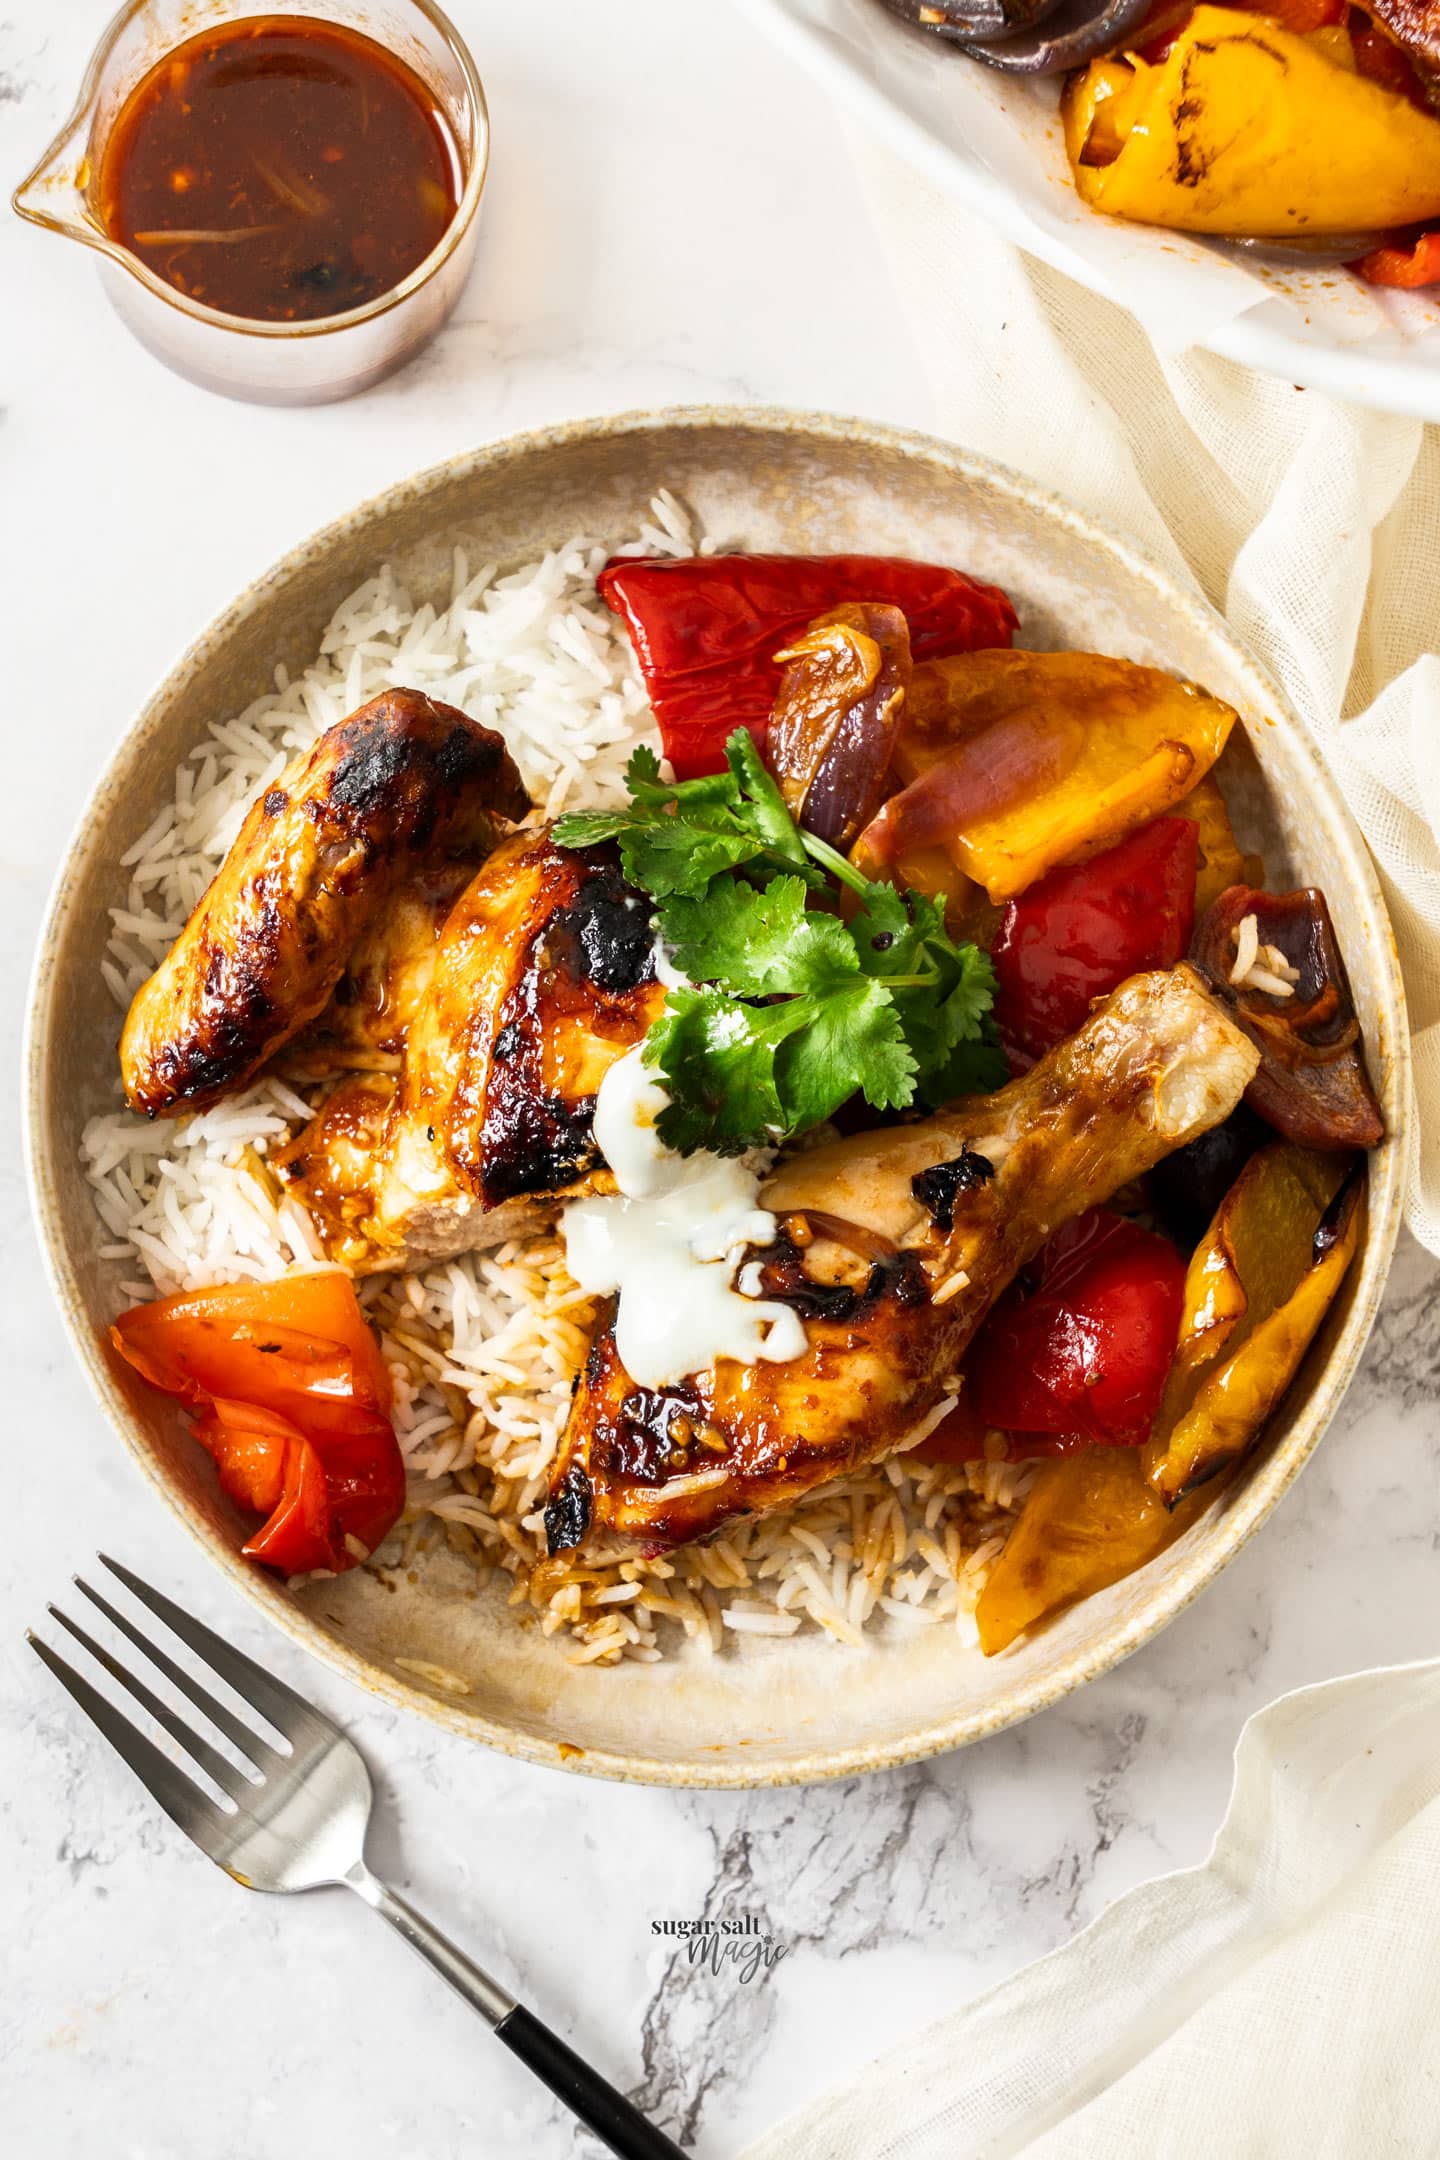 Harissa chicken with rice and yoghurt in a dish.